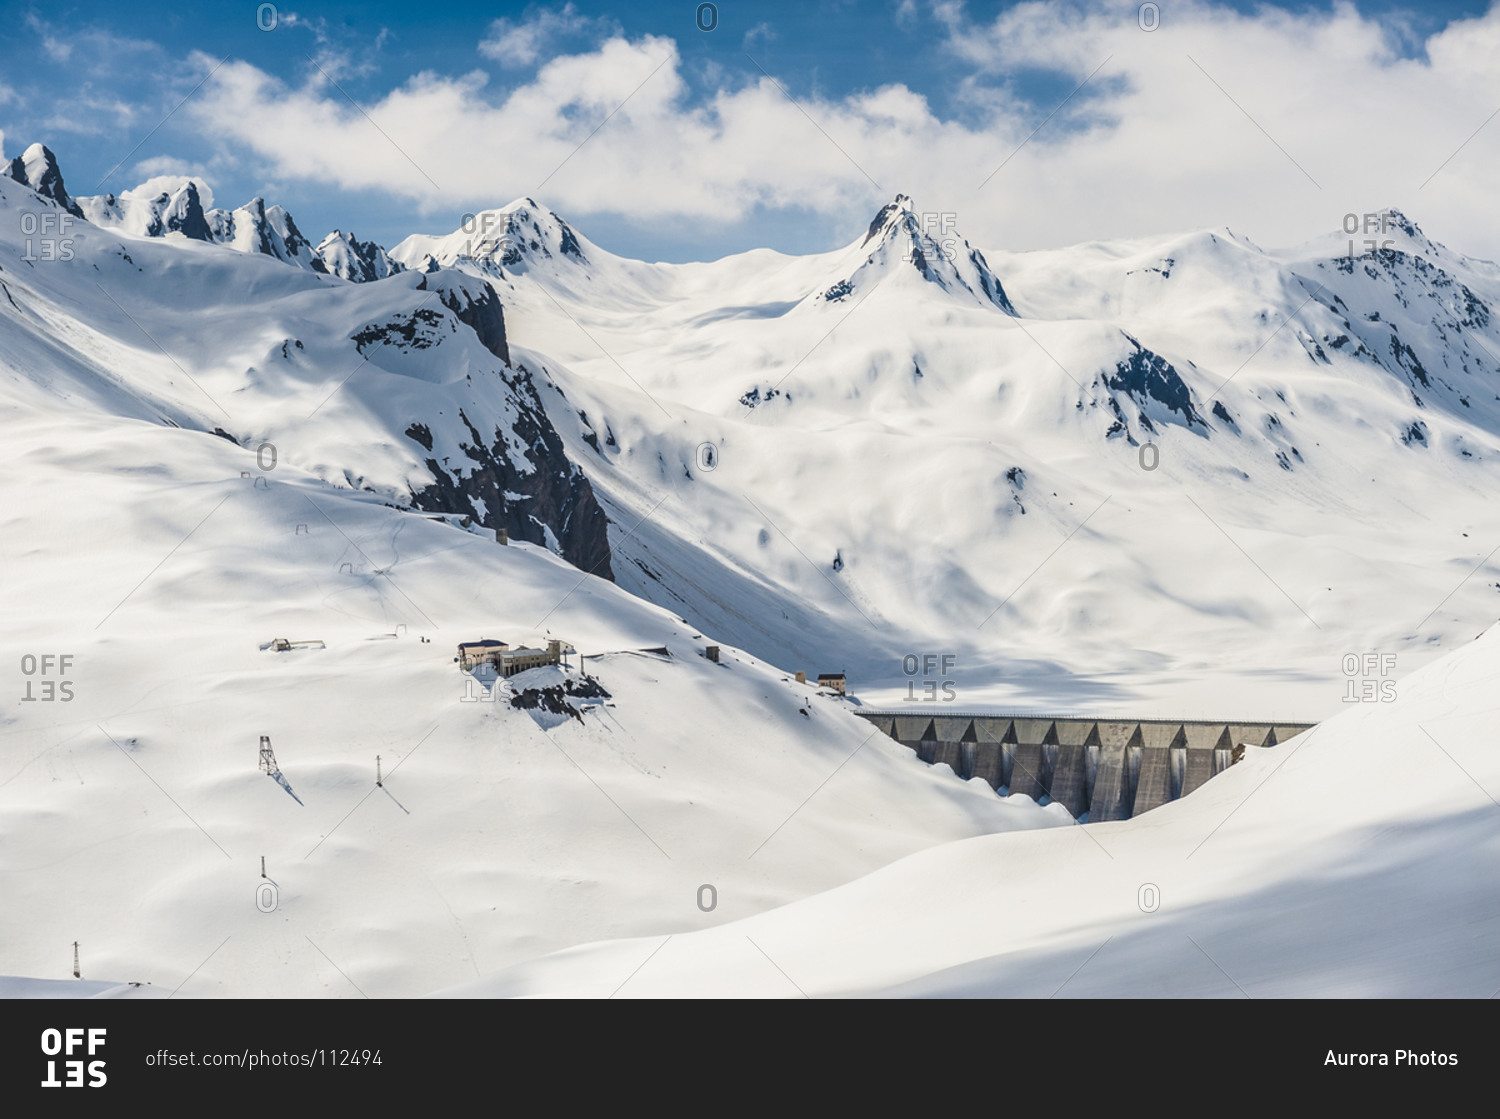 Dam for hydroelectric power production with snow-capped mountains in the background. Ossola, Italy